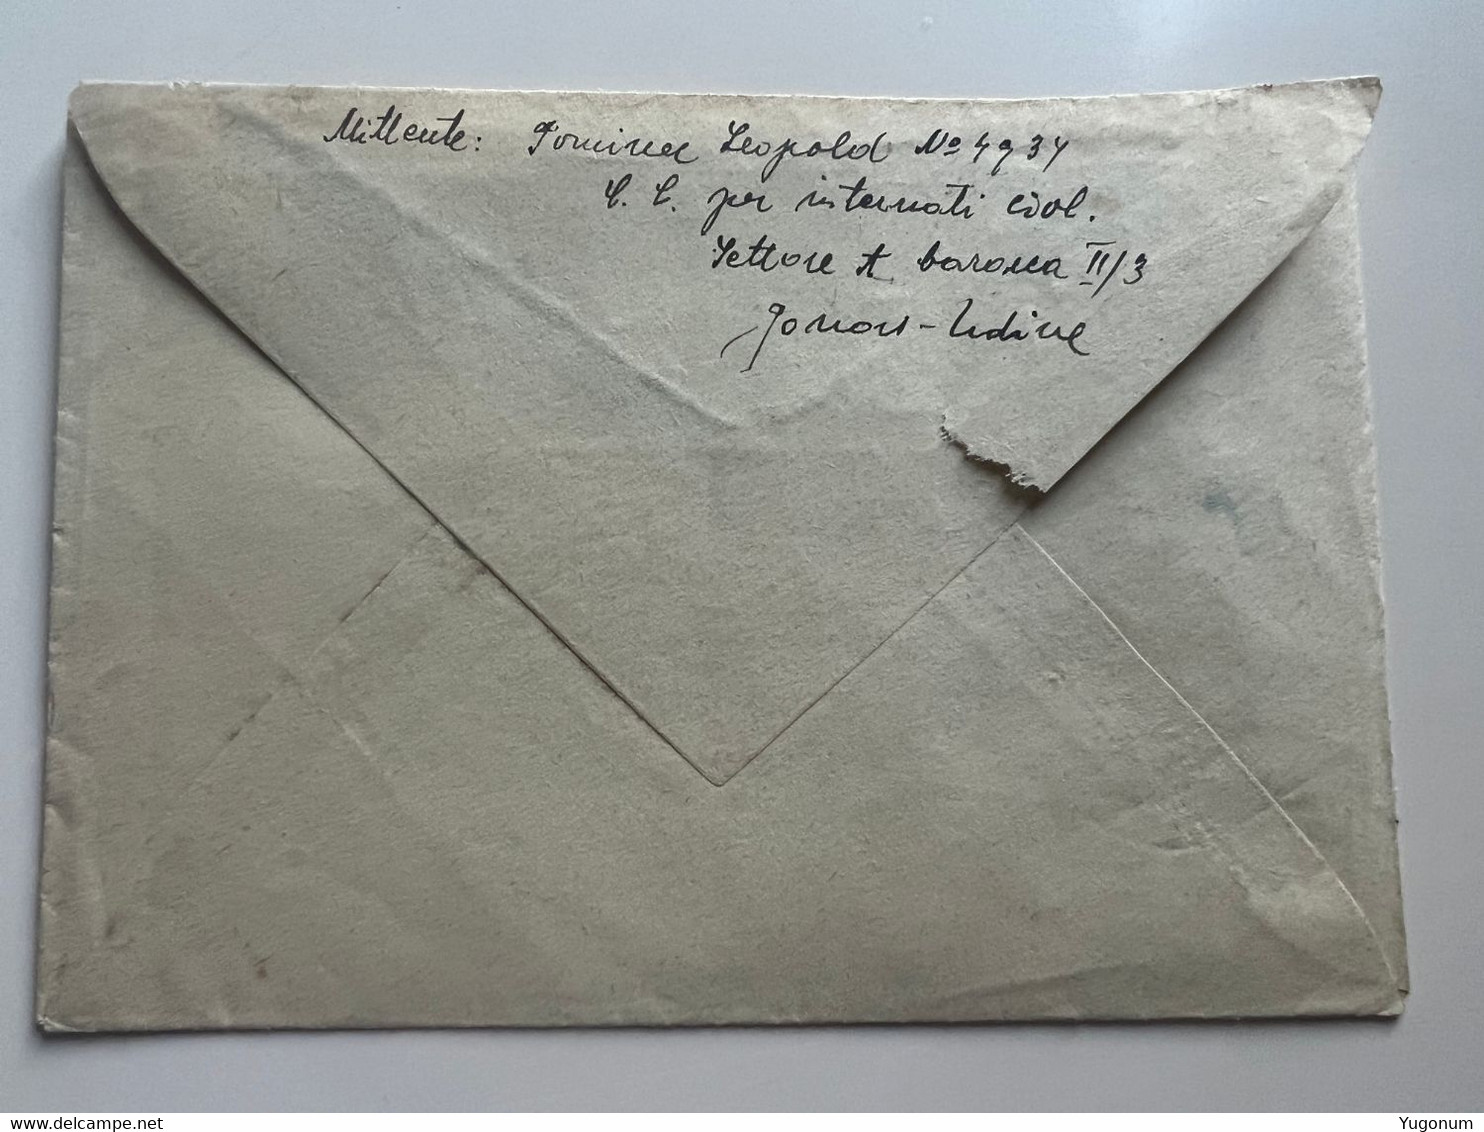 ITALY WWII 1943 Letter Sent From Concenetration Camp GONARS  -> Lubiana (No 2050) - Lubiana